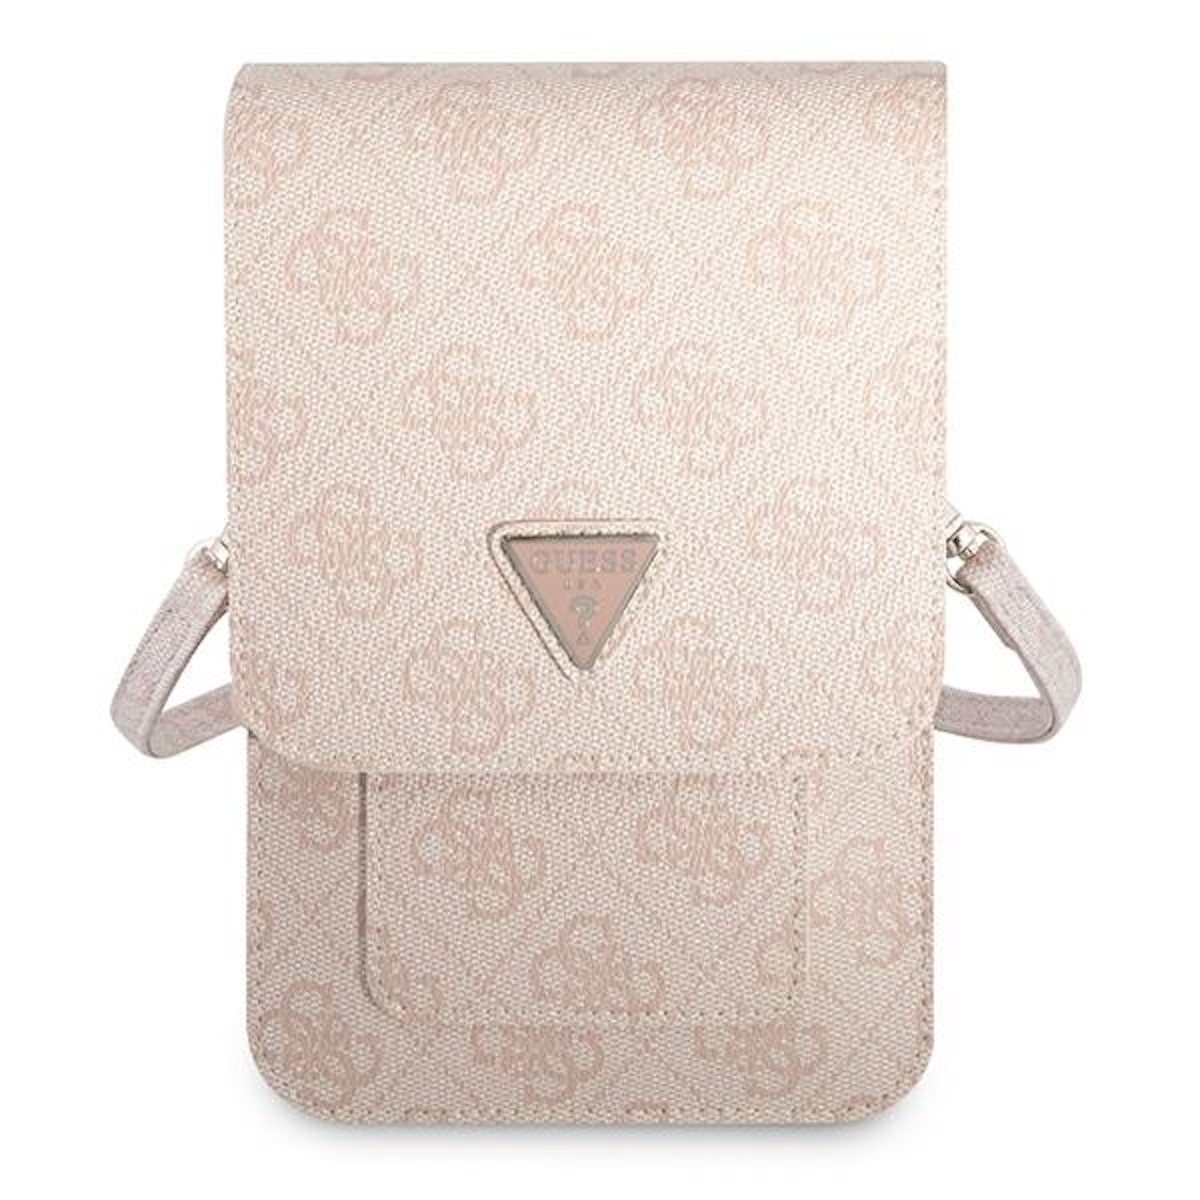 GUESS Torebka Universelle Umhängetasche, Triangle Rosa Full Universell, Cover, Tasche